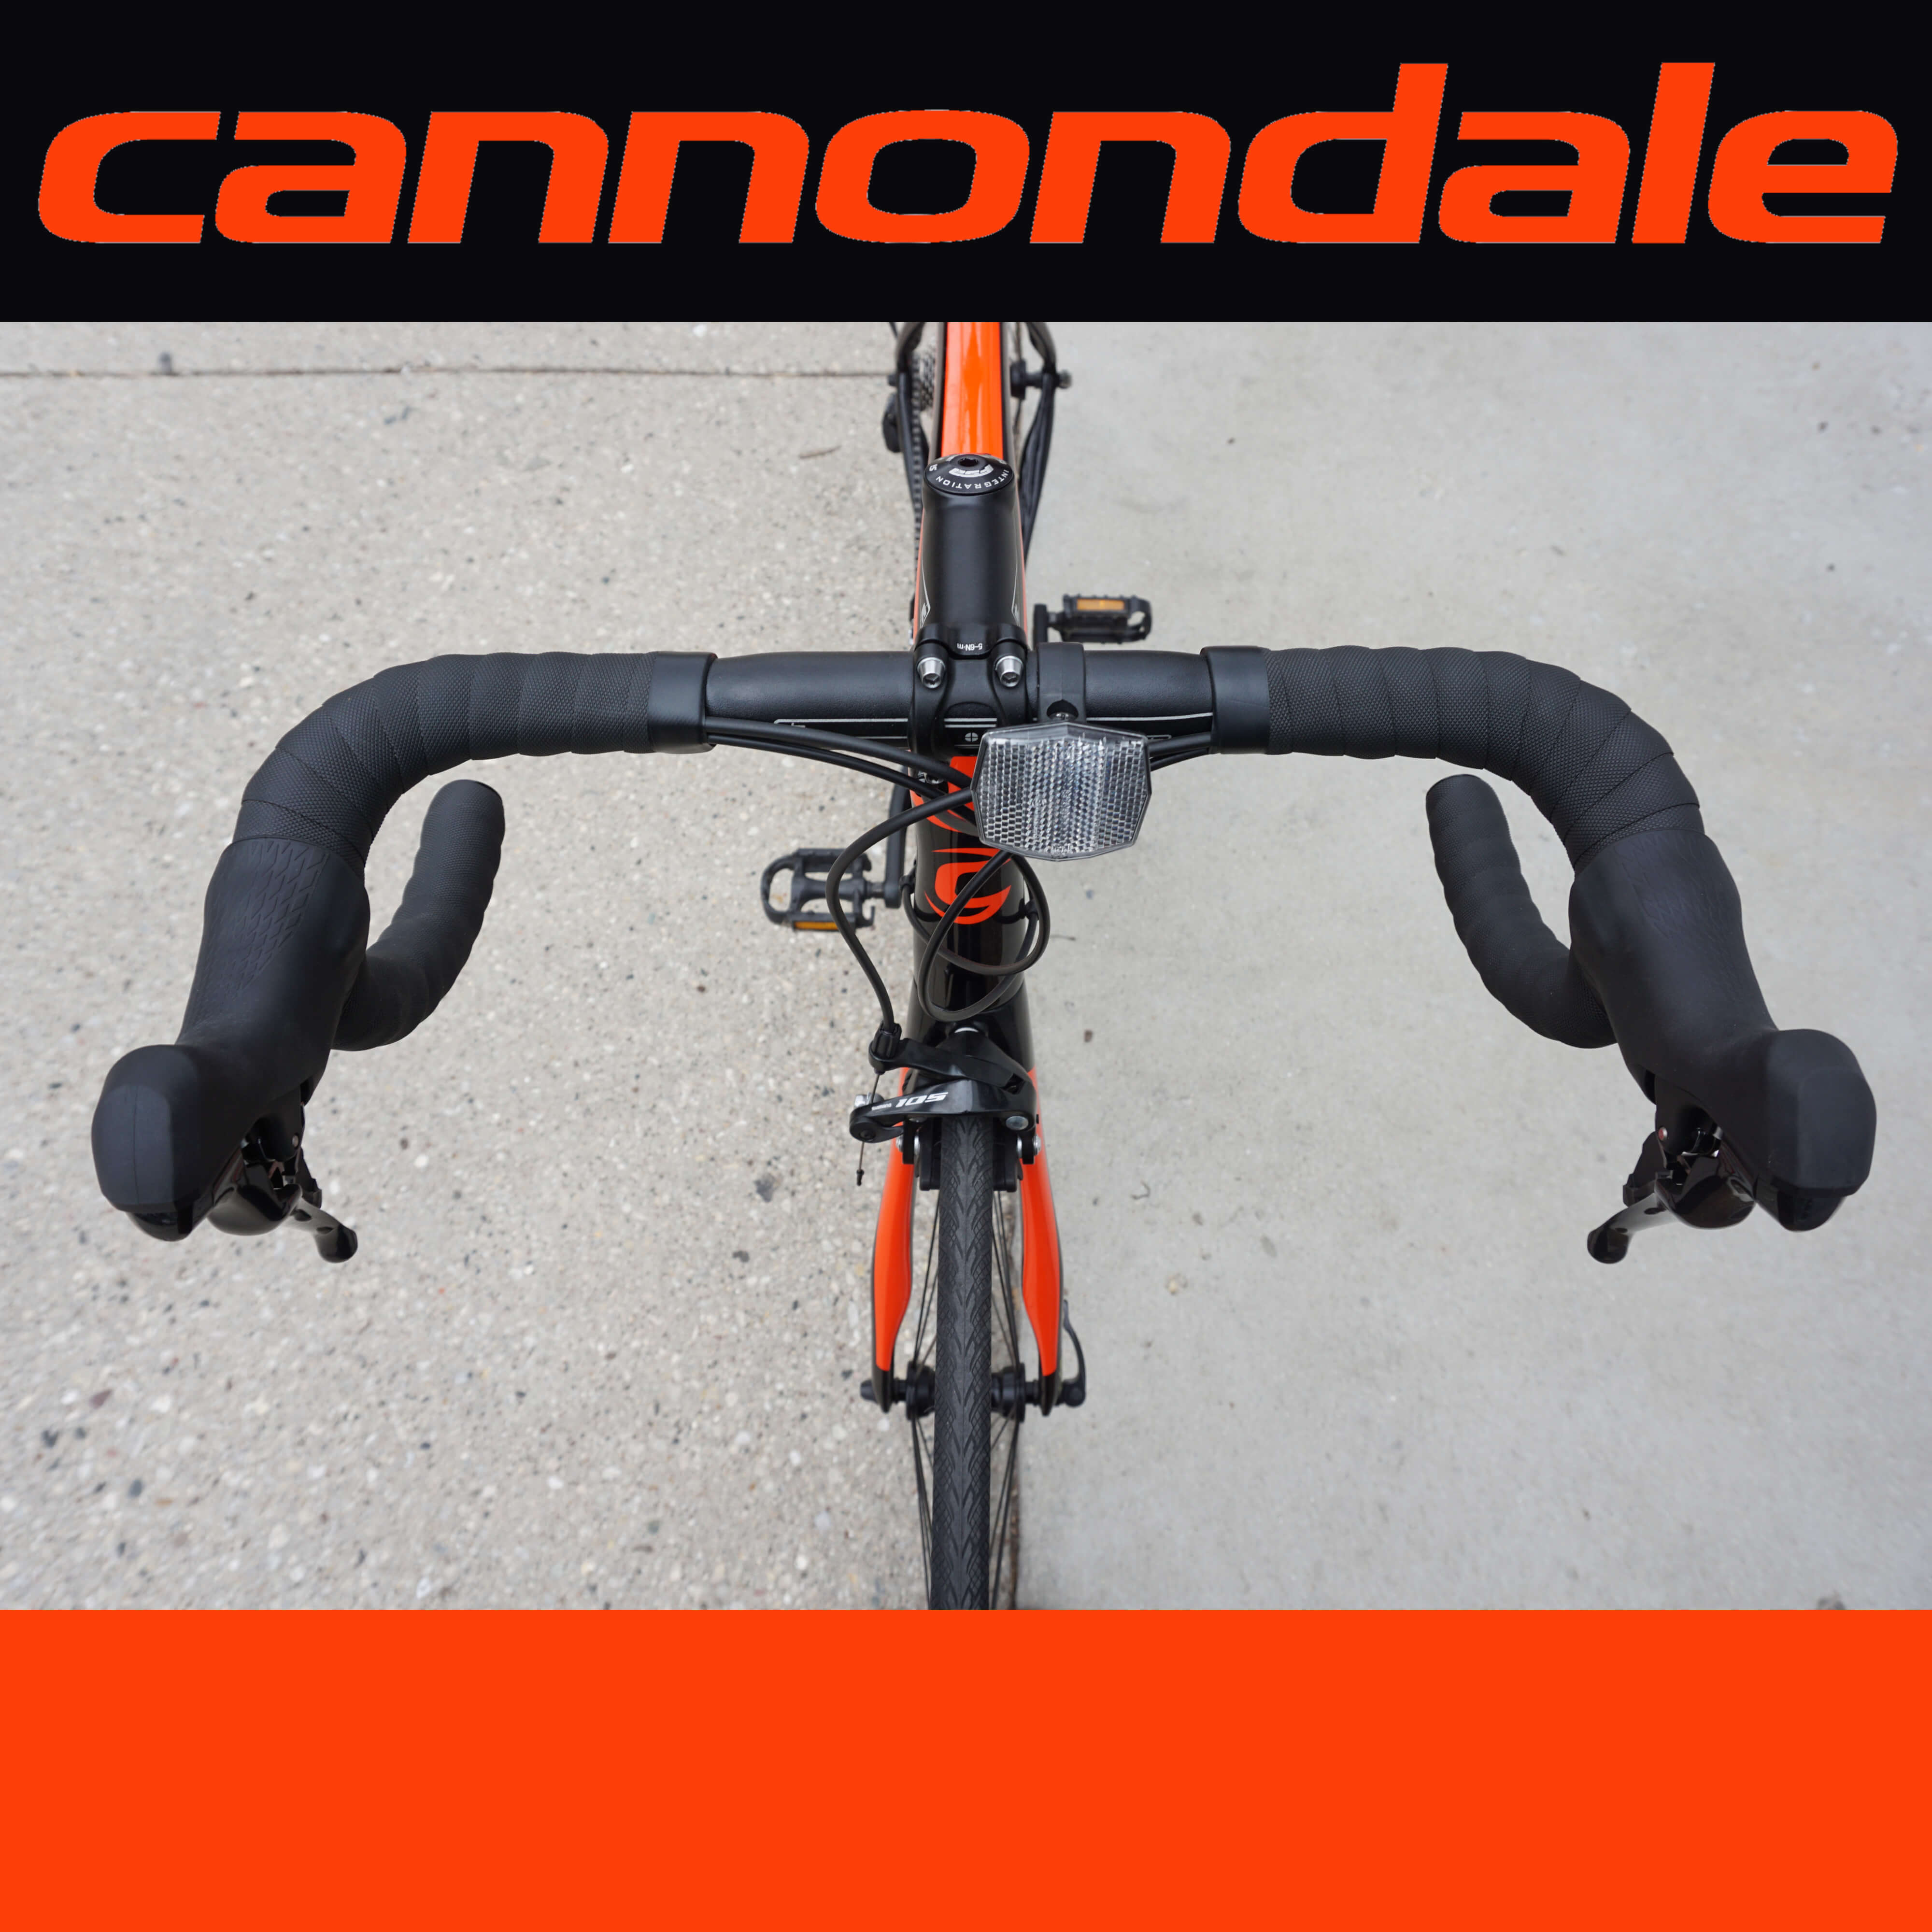 Cannondale Synapse 700c Wheel 54cm Frame (IN STORE ONLY)